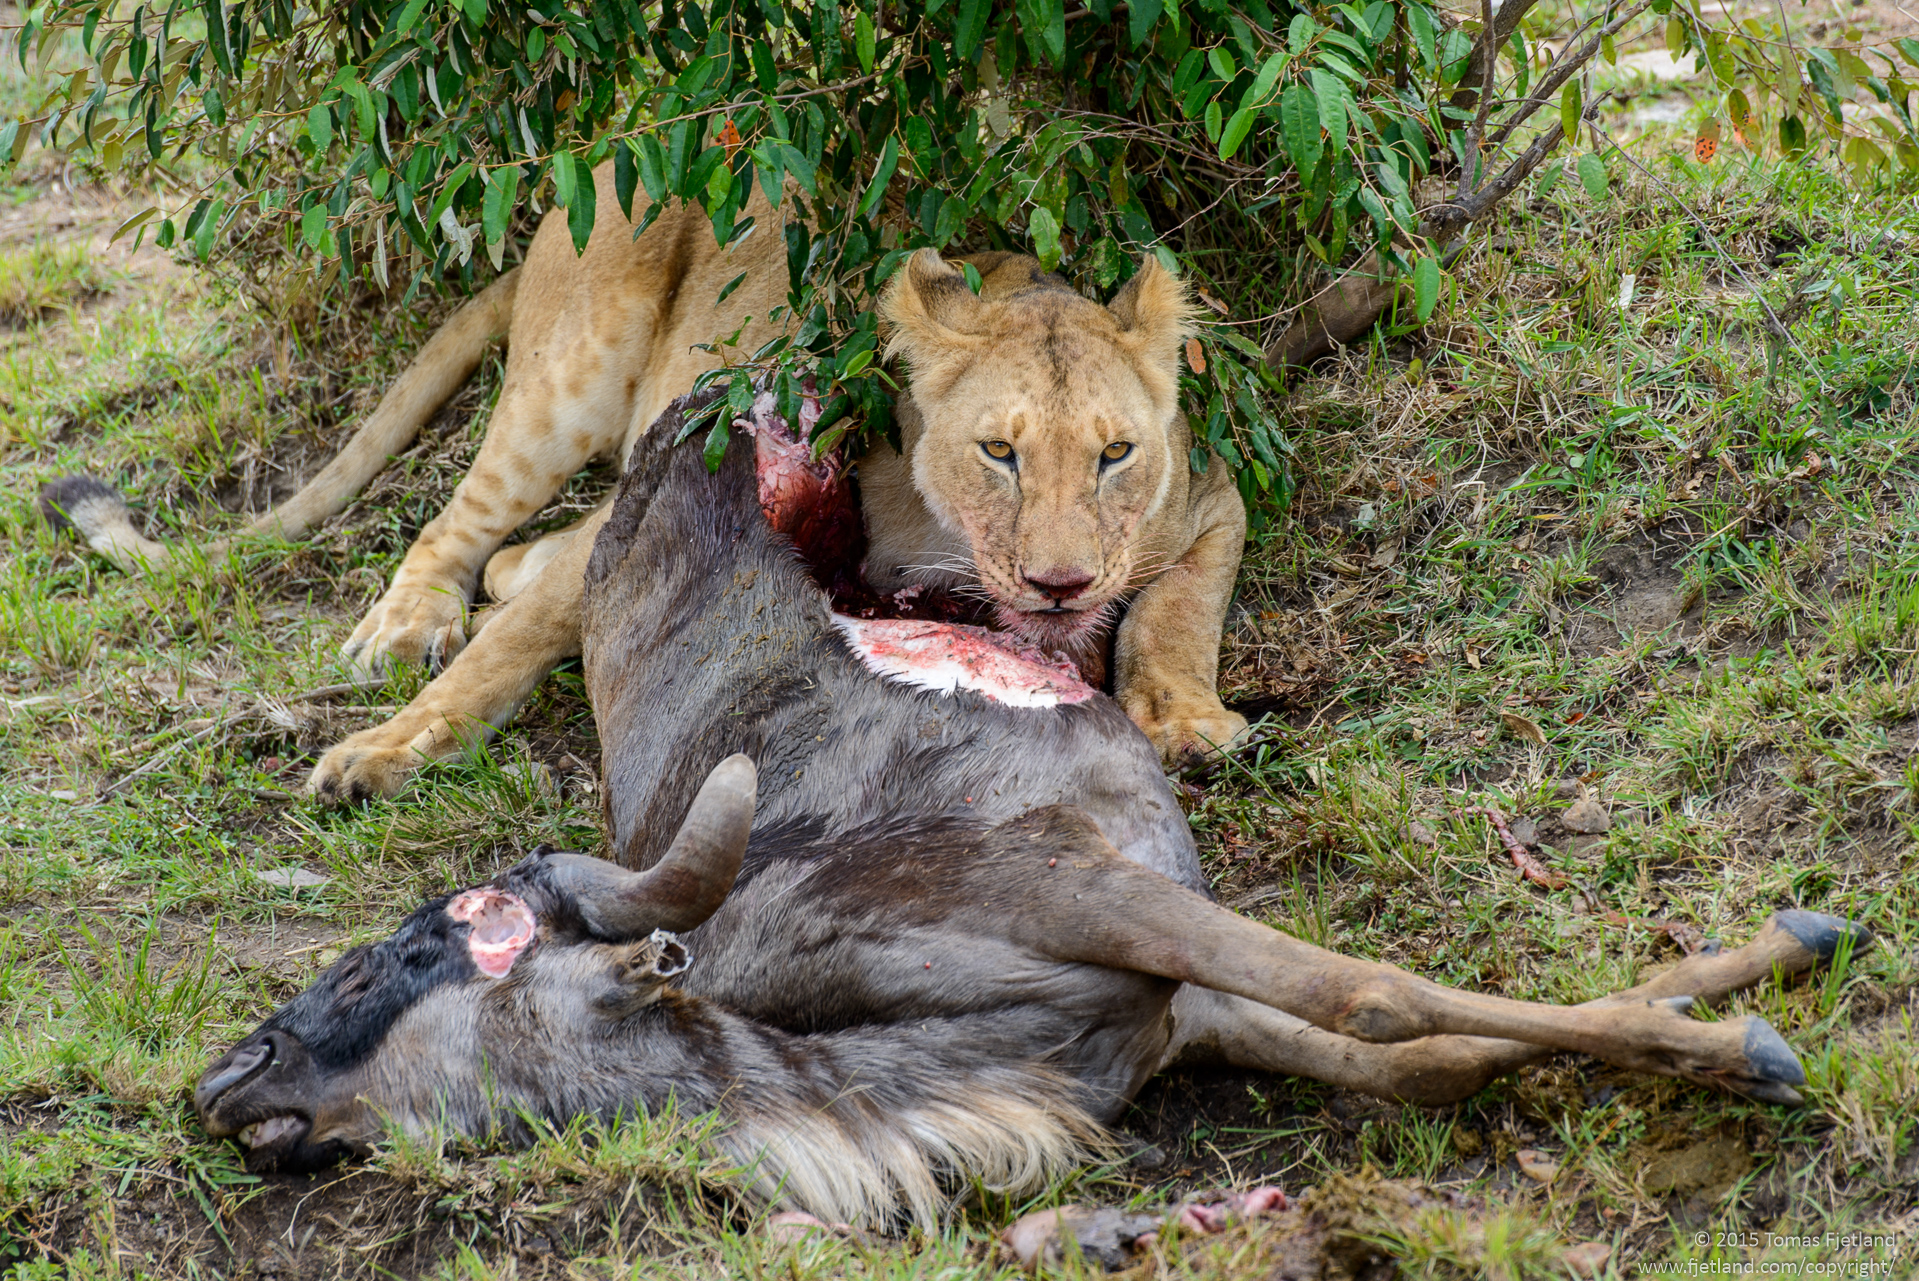 Lioness with a fresh wildebeest kill her and another lioness just hunted down